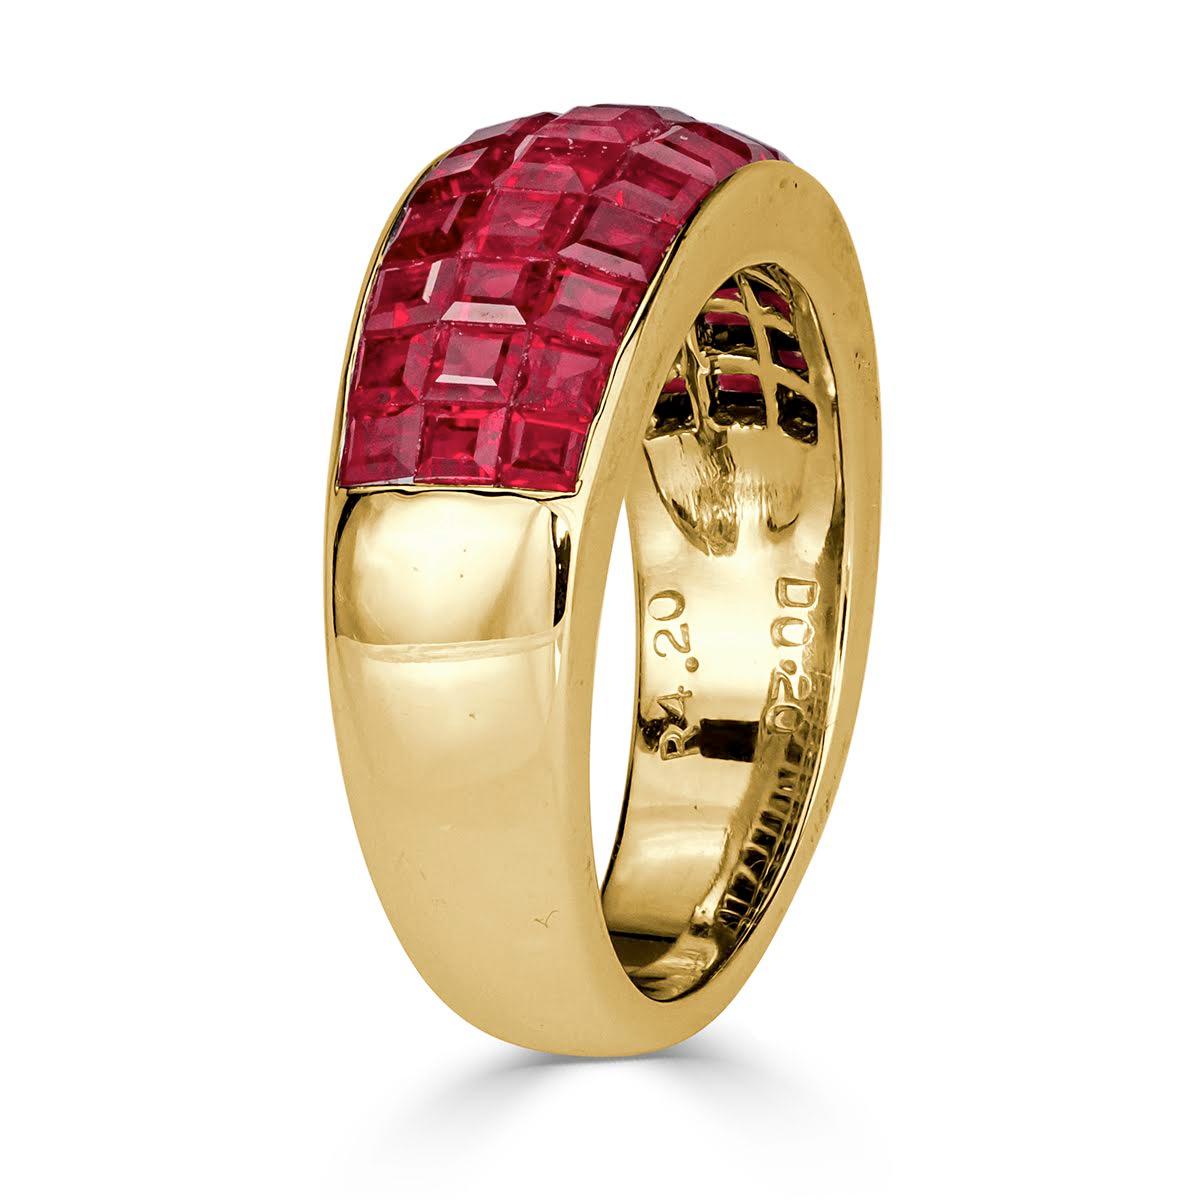 This gorgeous vintage ring showcases 4.20ct of square cut rubies hand set in 18k yellow gold. It has unparalled presence and exudes sheer elegance!
